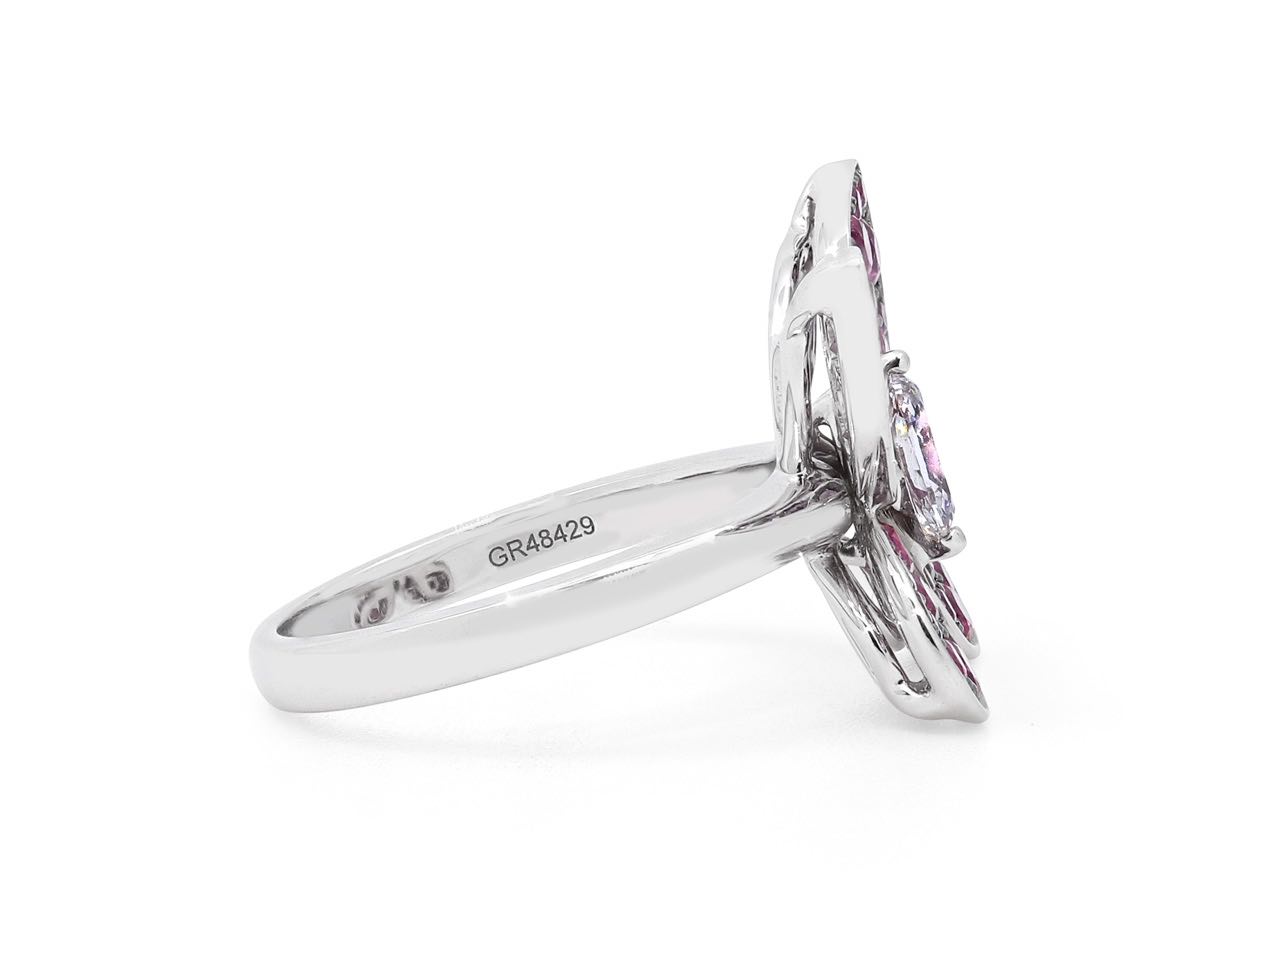 Graff Butterfly Diamond and Ruby Ring in 18K White Gold